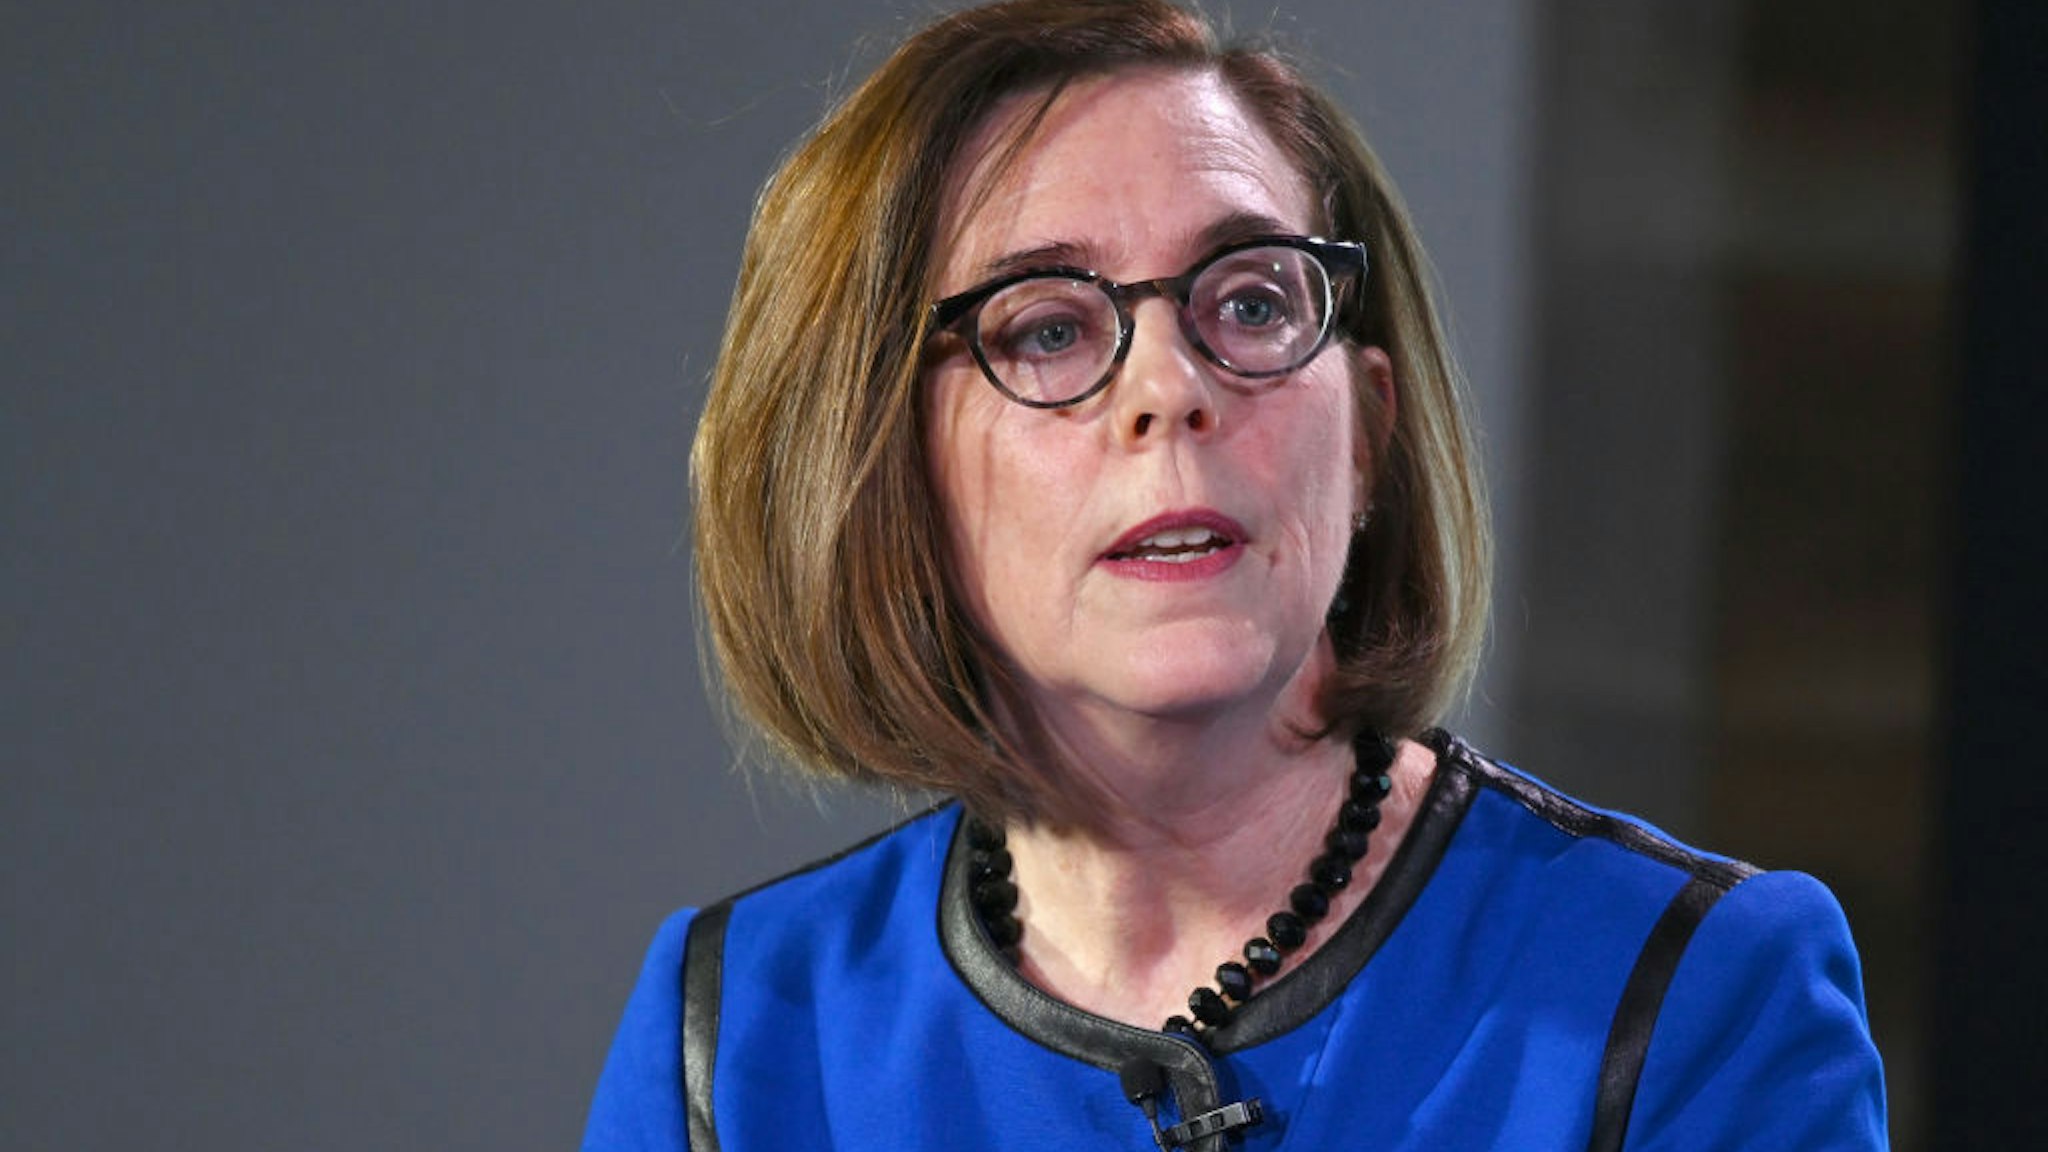 WASHINGTON, DC - FEBRUARY 22: Oregon Governor Kate Brown speaks at the Axios News Shapers event on the U.S. education system on February 22, 2019 in Washington, DC. (Photo by Shannon Finney/Getty Images)